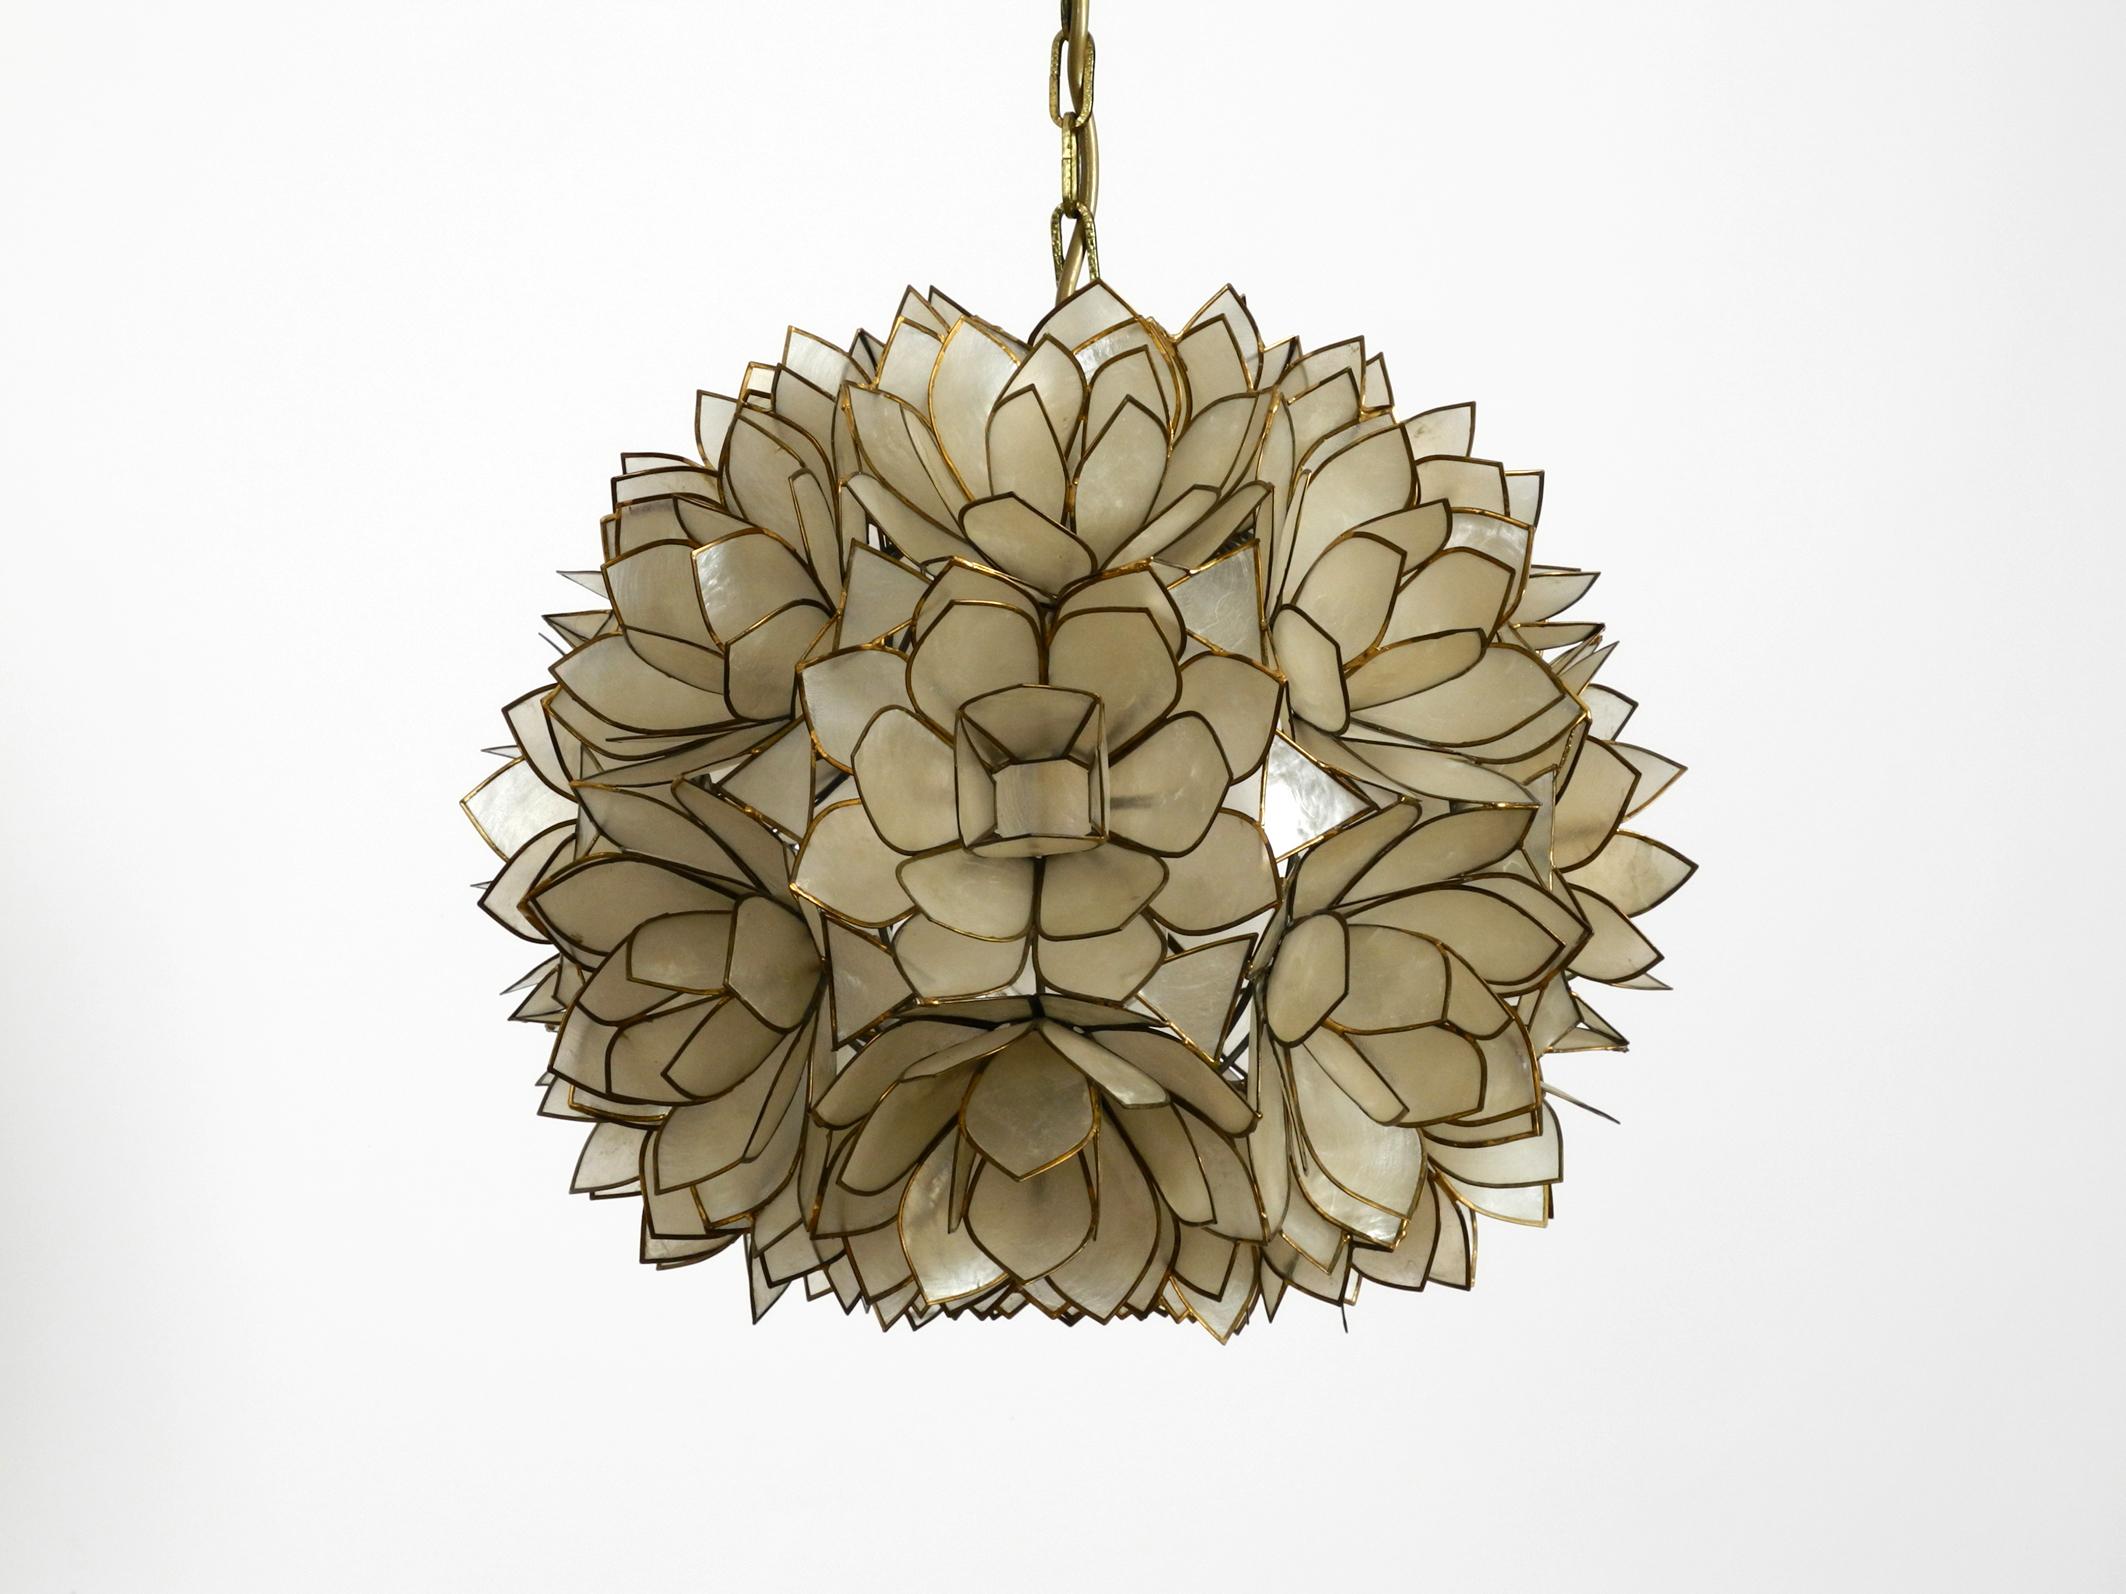 Very elegant pendant lamp in spherical shape made of mother of pearl. 
Like a bunch of flowers or blossoms. Great rare design of the 1970s. 
Very high quality workmanship.
Metal frame is hung on a brass chain and brass canopy. 
One E27 socket